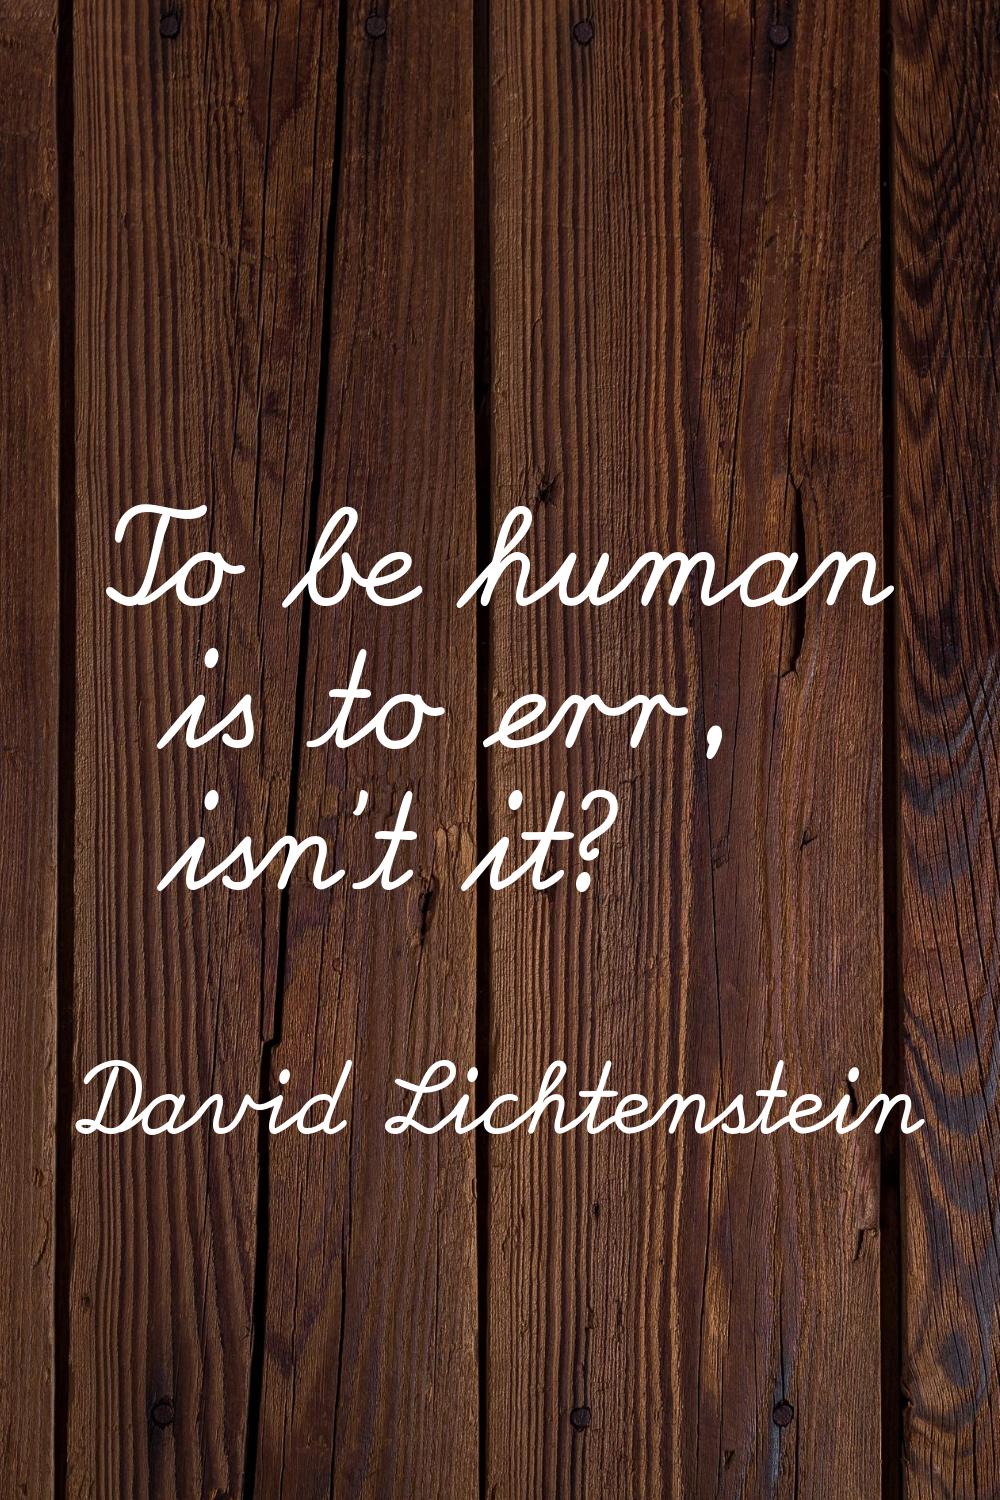 To be human is to err, isn't it?